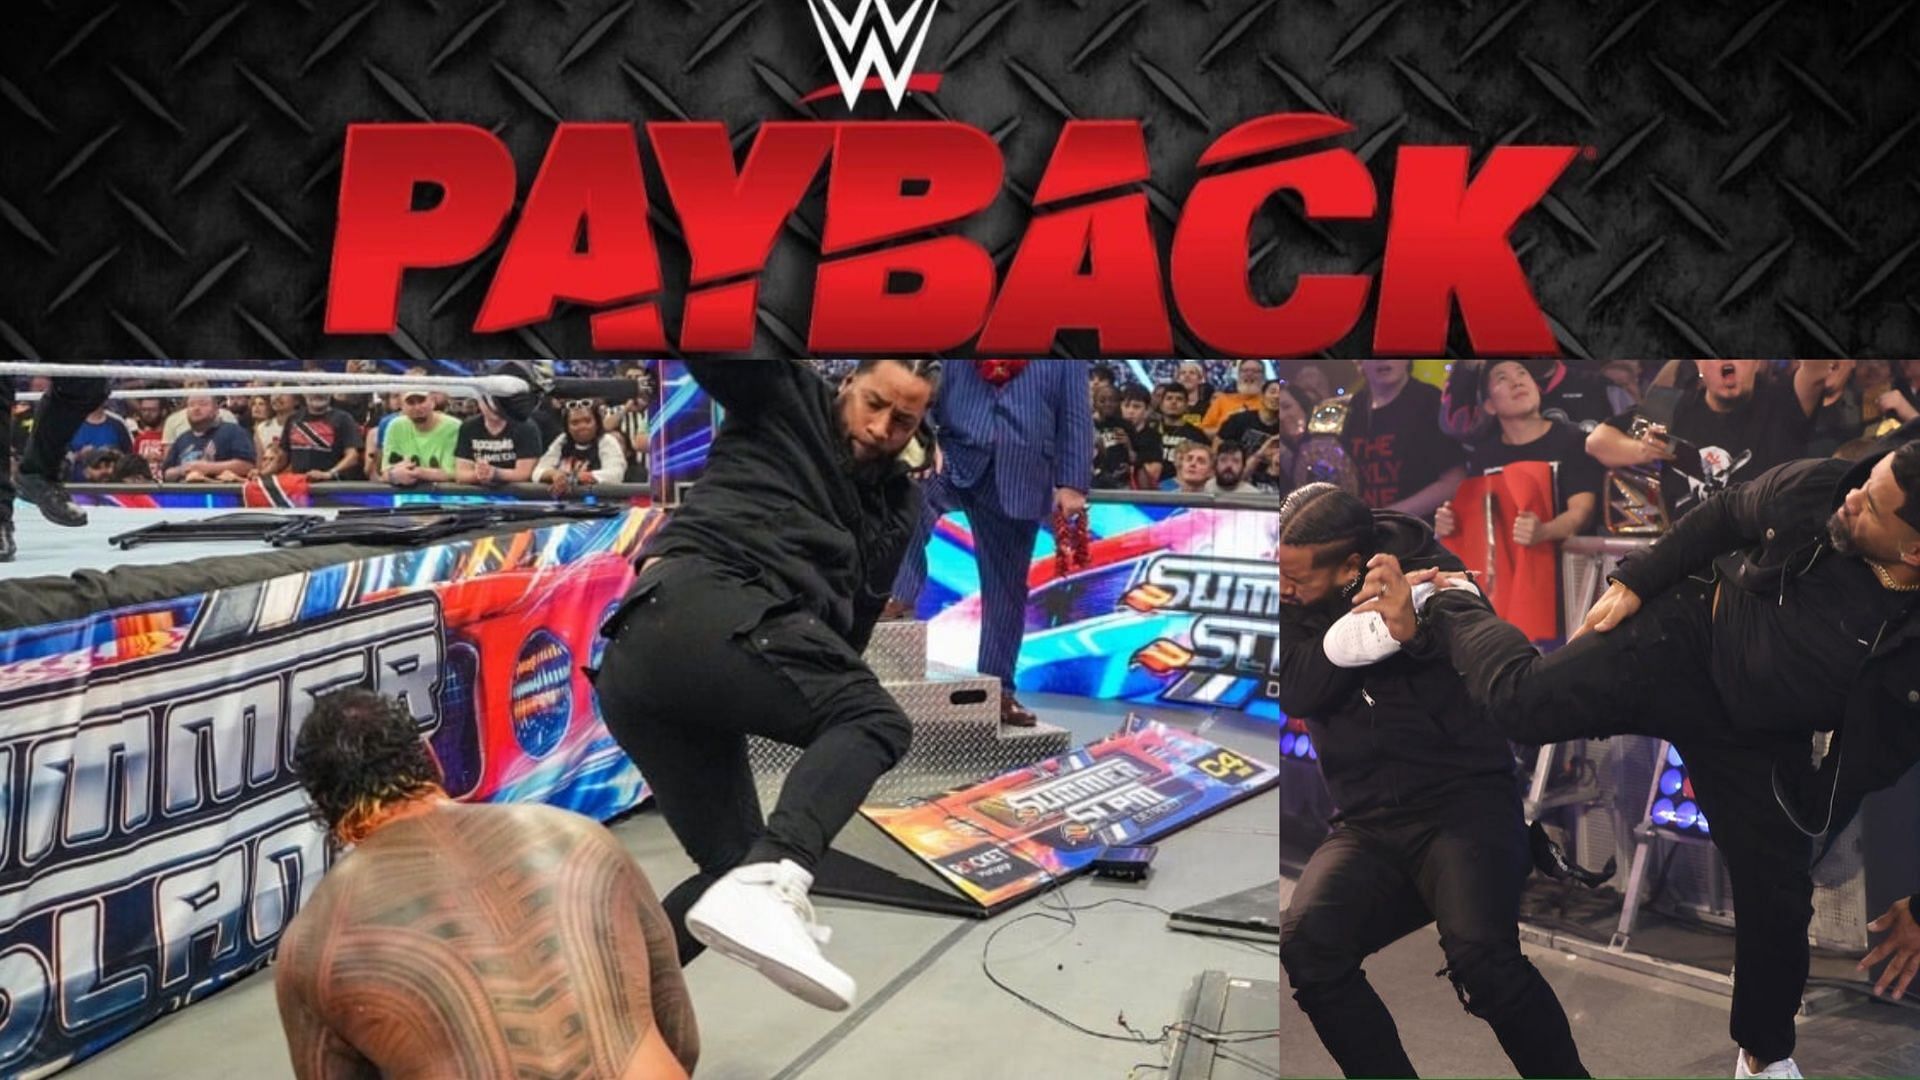 Jimmy vs. Jey Uso is rumored to take place at WWE Payback 2023.